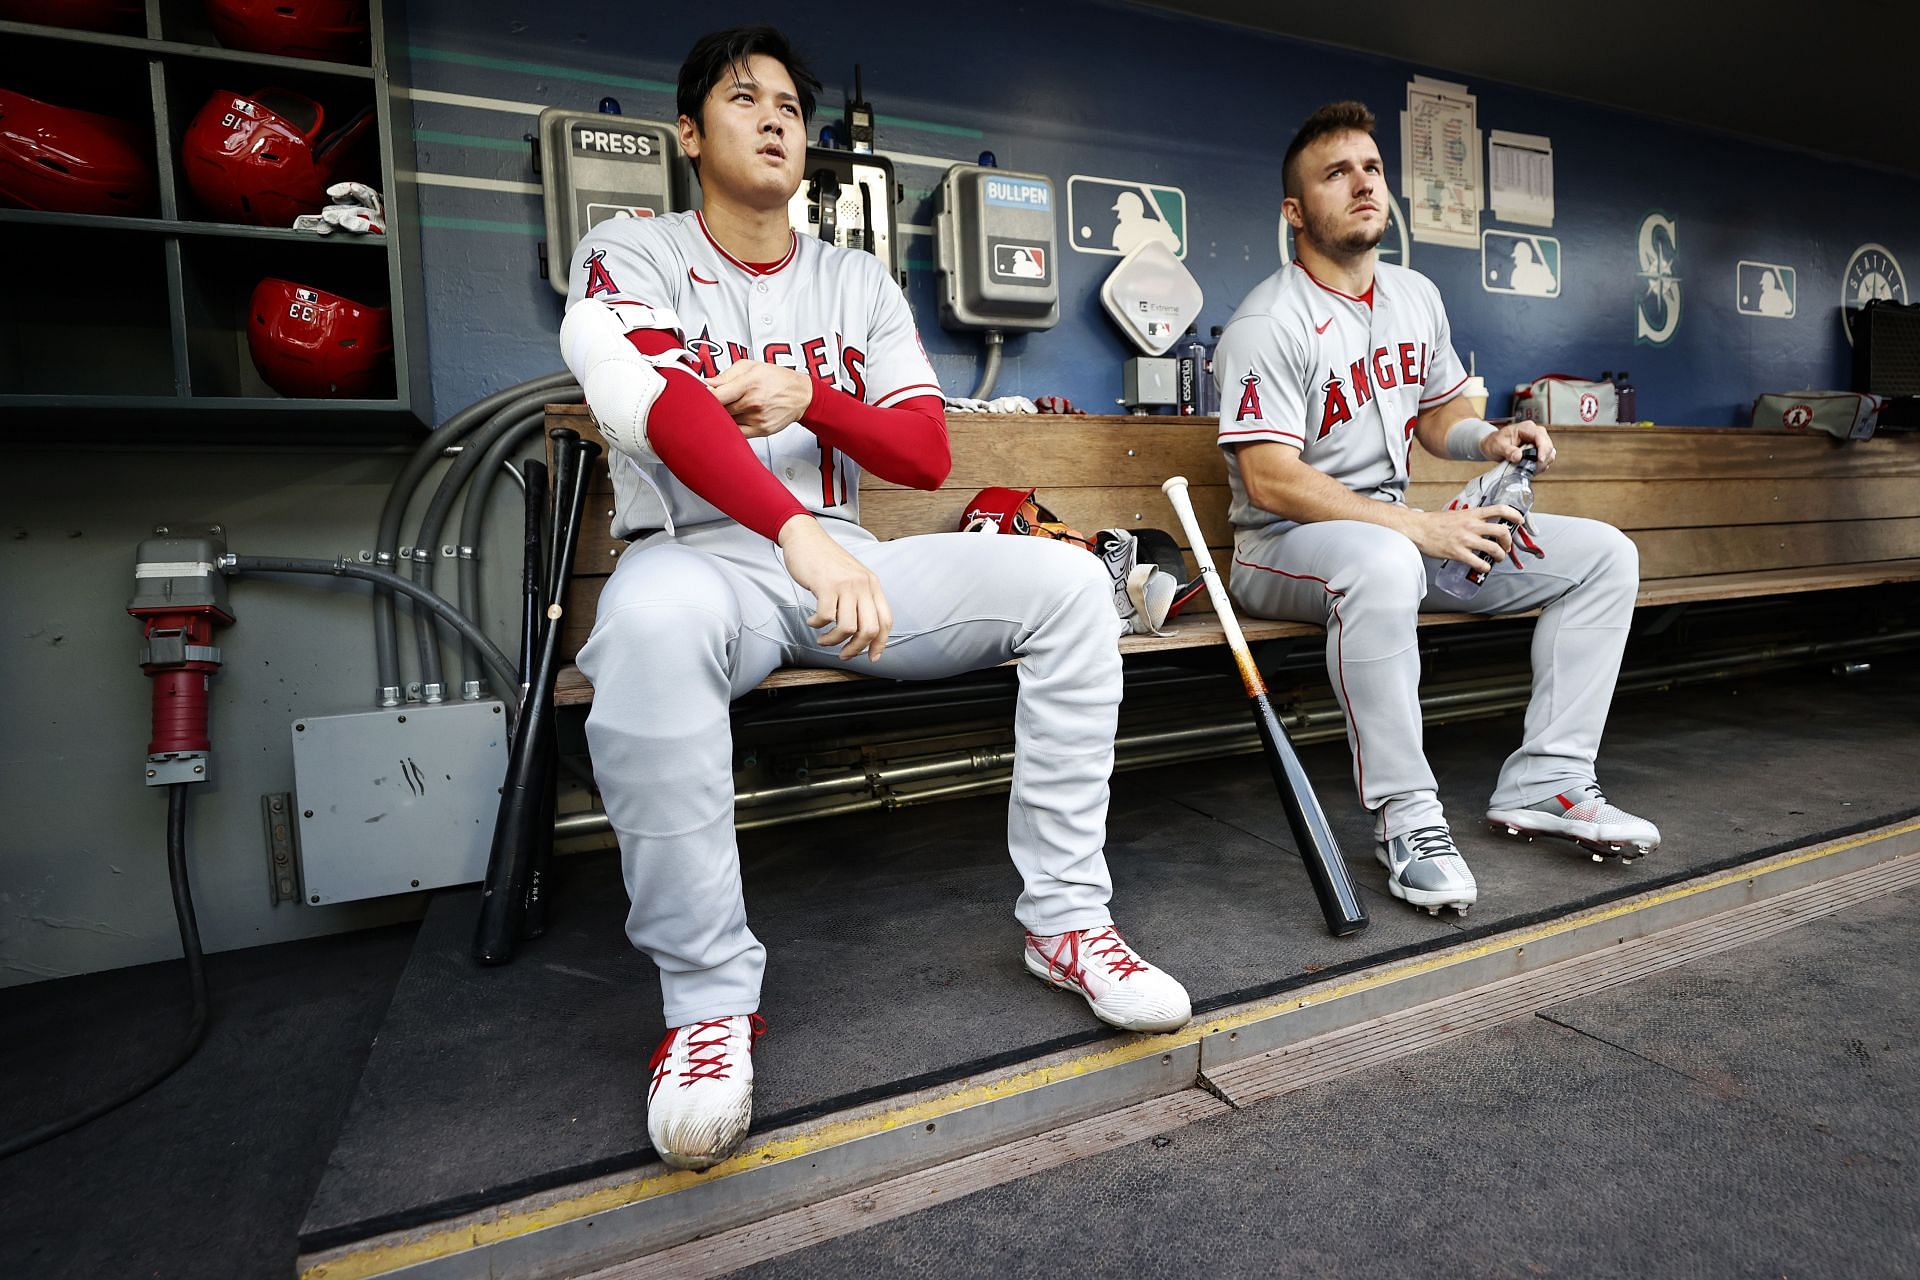 Trout and Ohtani sit together in the dugout during a Los Angeles Angels v Seattle Mariners game.